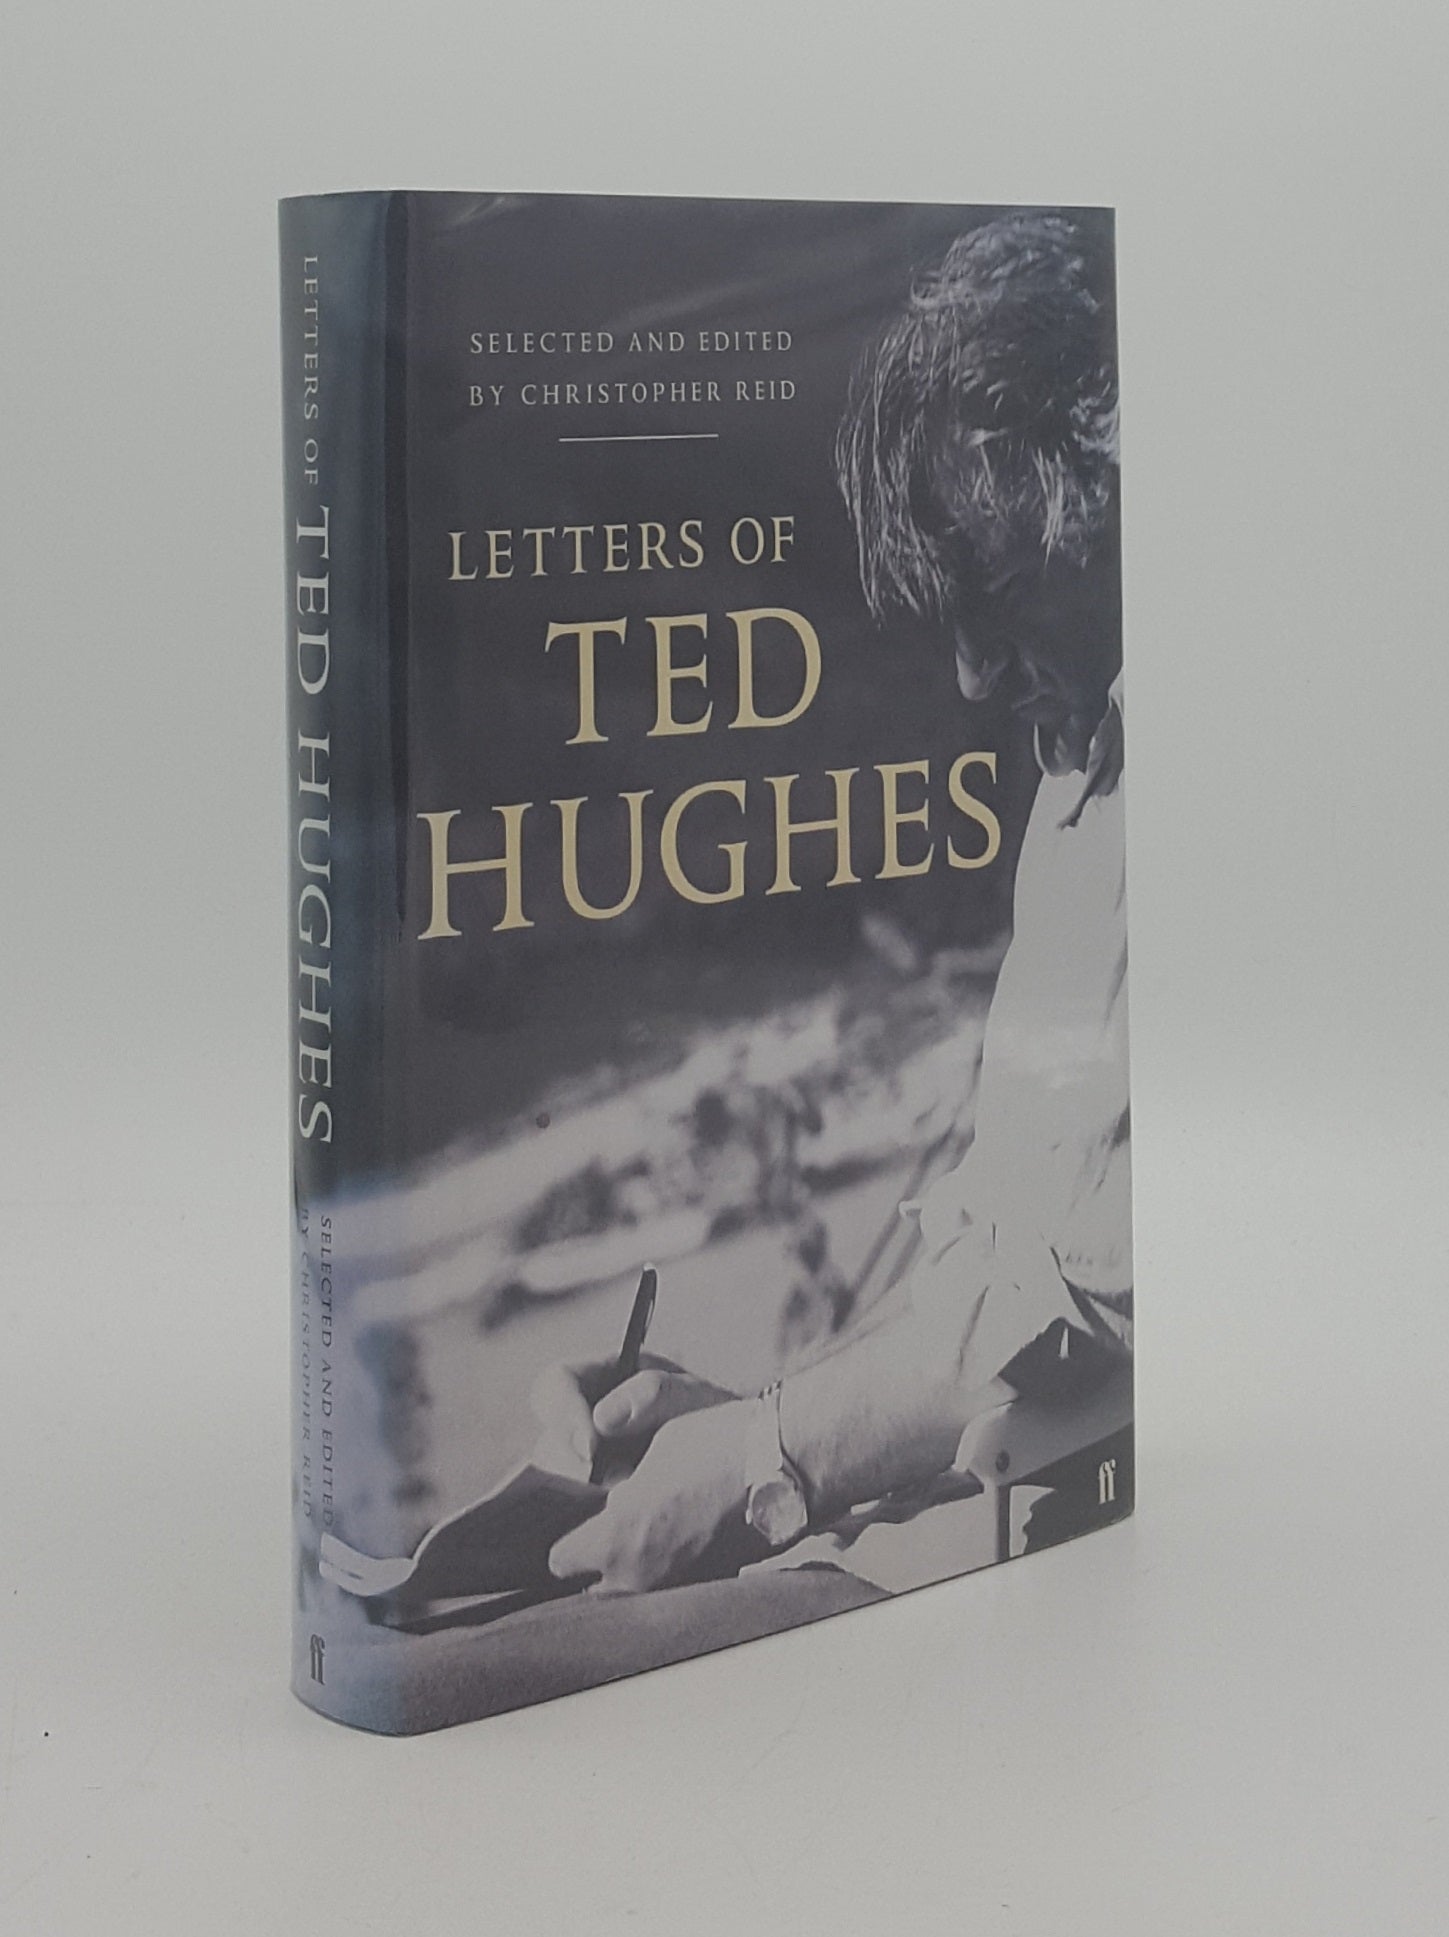 HUGHES Ted, REID Christopher - Letters of Ted Hughes